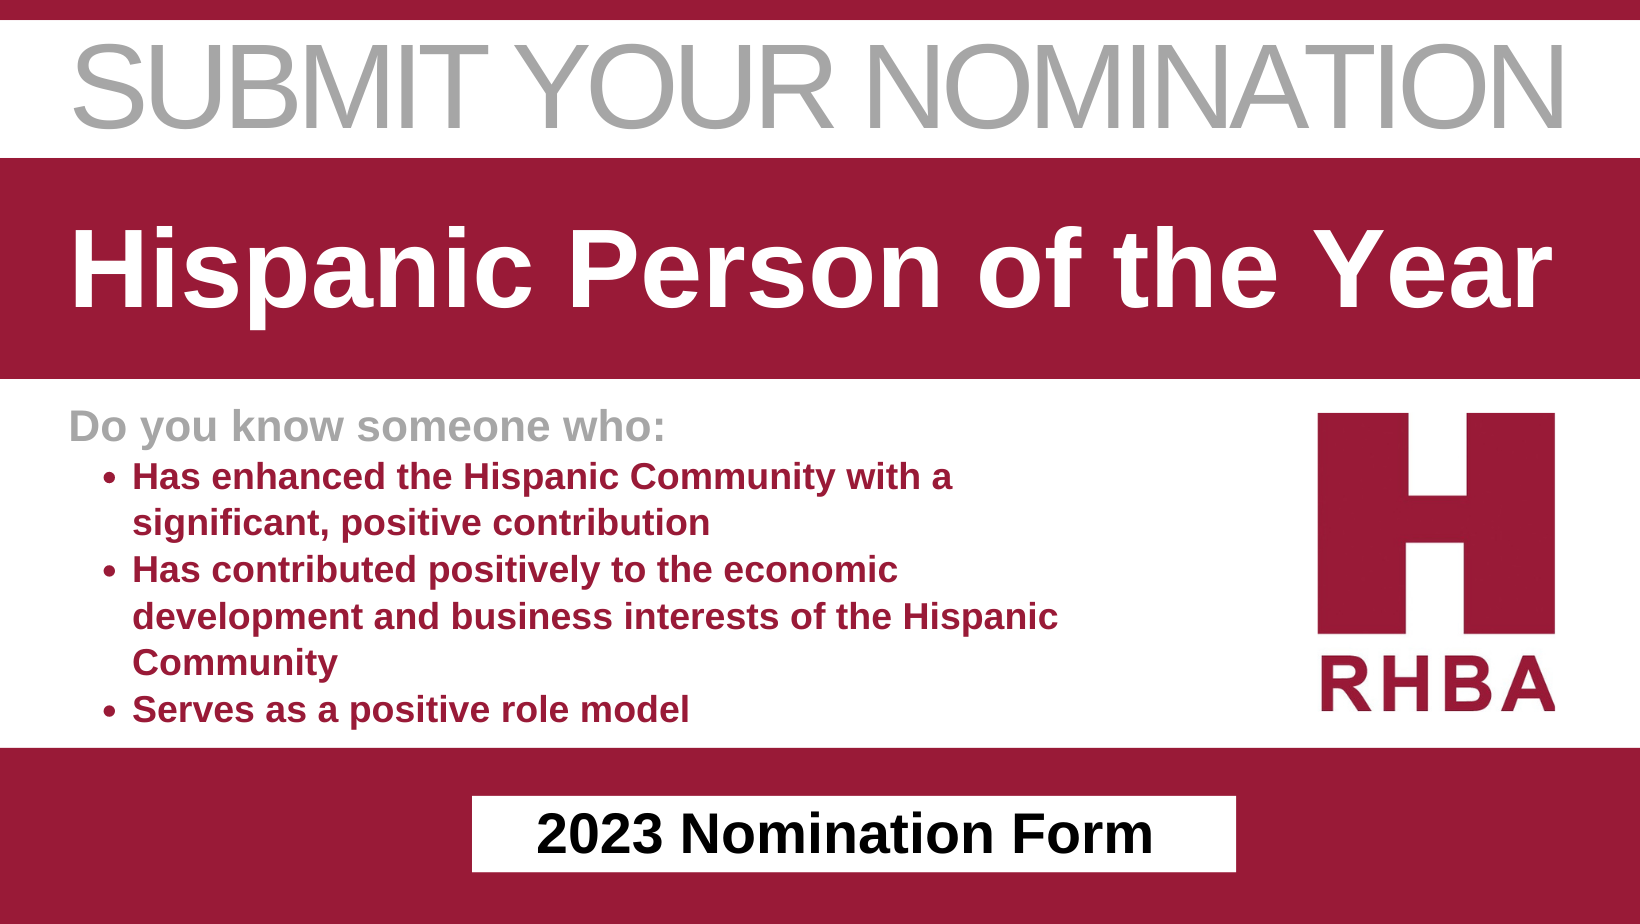 Hispanic Person of the Year Nominations